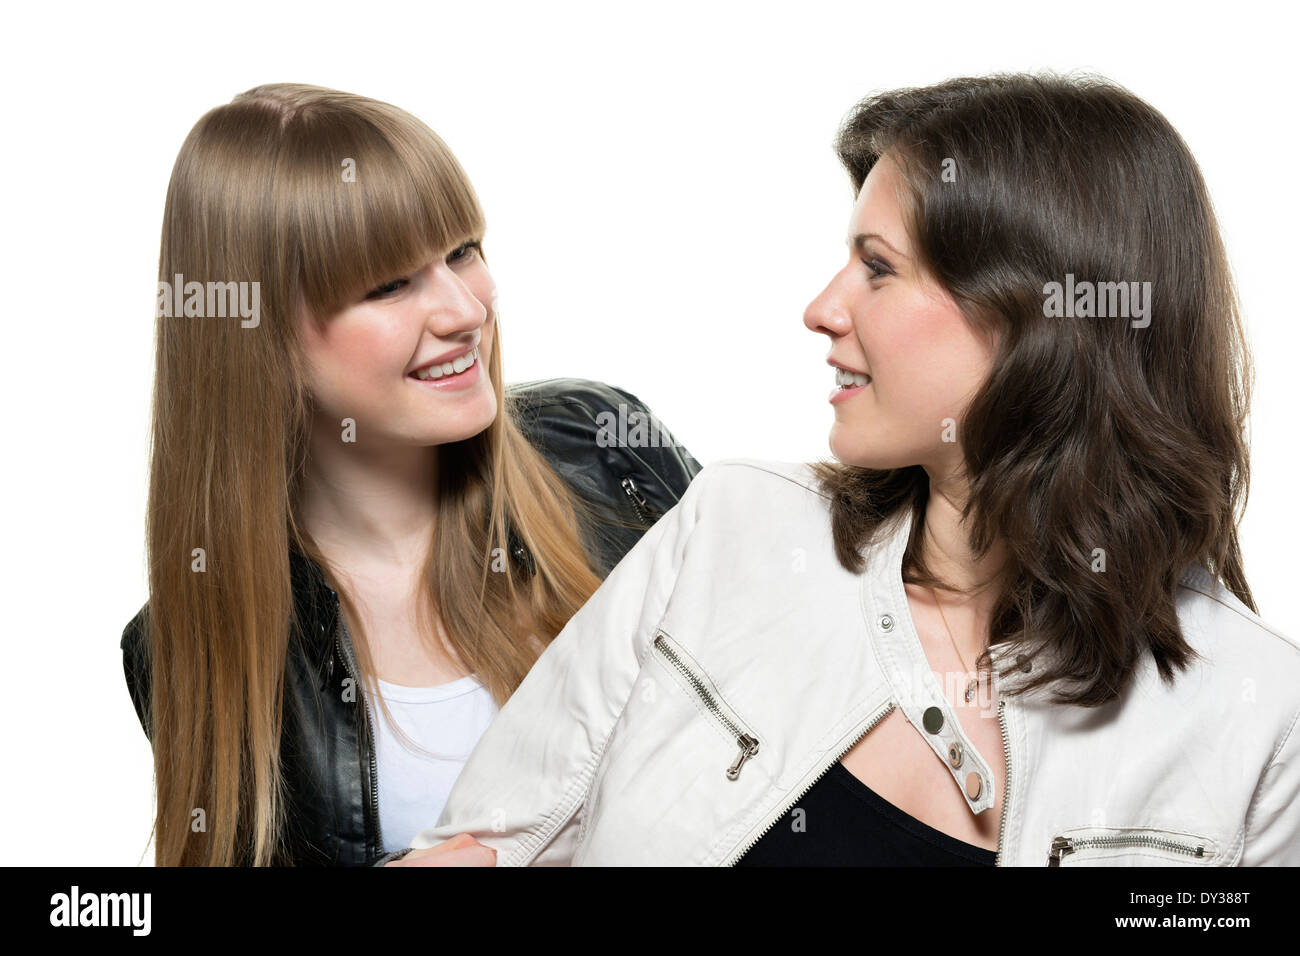 Two women blonde and brunette, with black and white leather jacket, look at each other Stock Photo